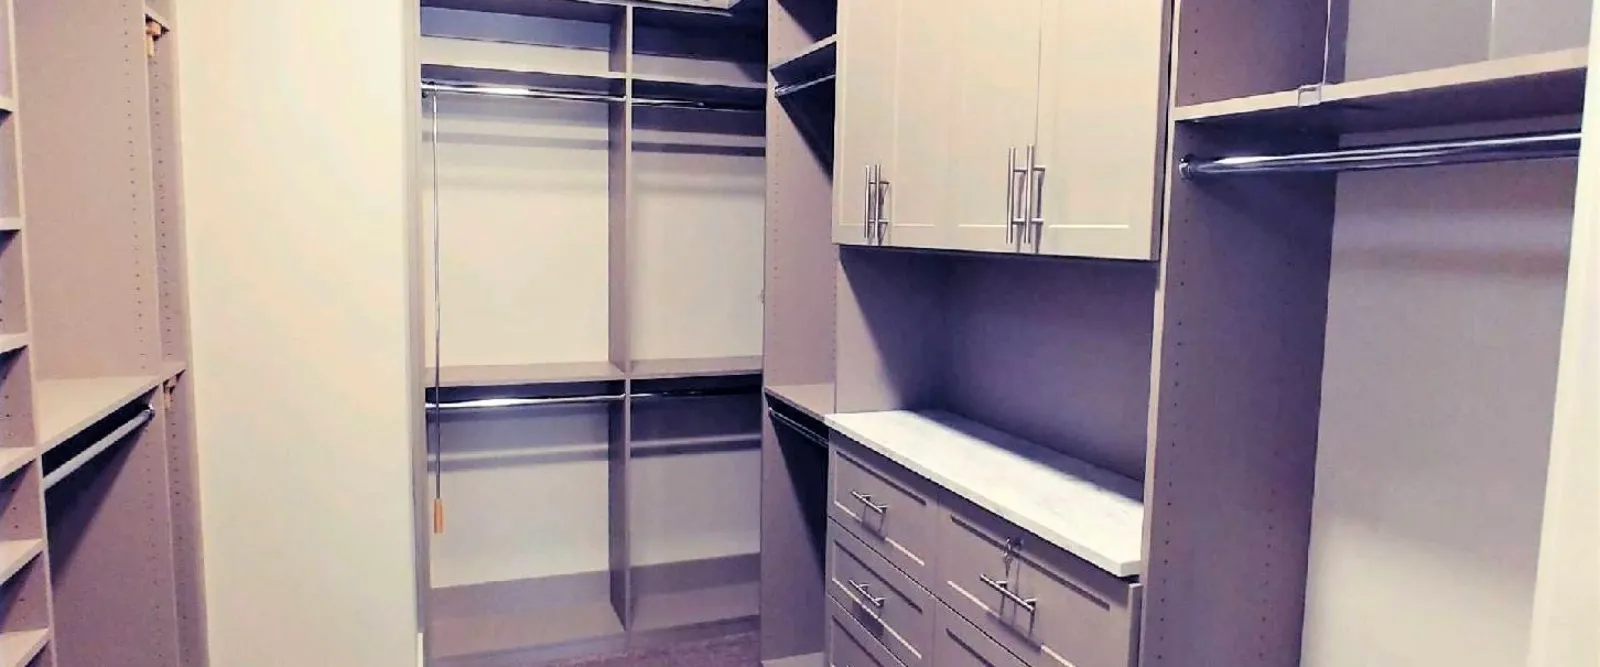 Stay Organized With Custom Walk-in Closet Systems for Your Hermitage, TN, Home